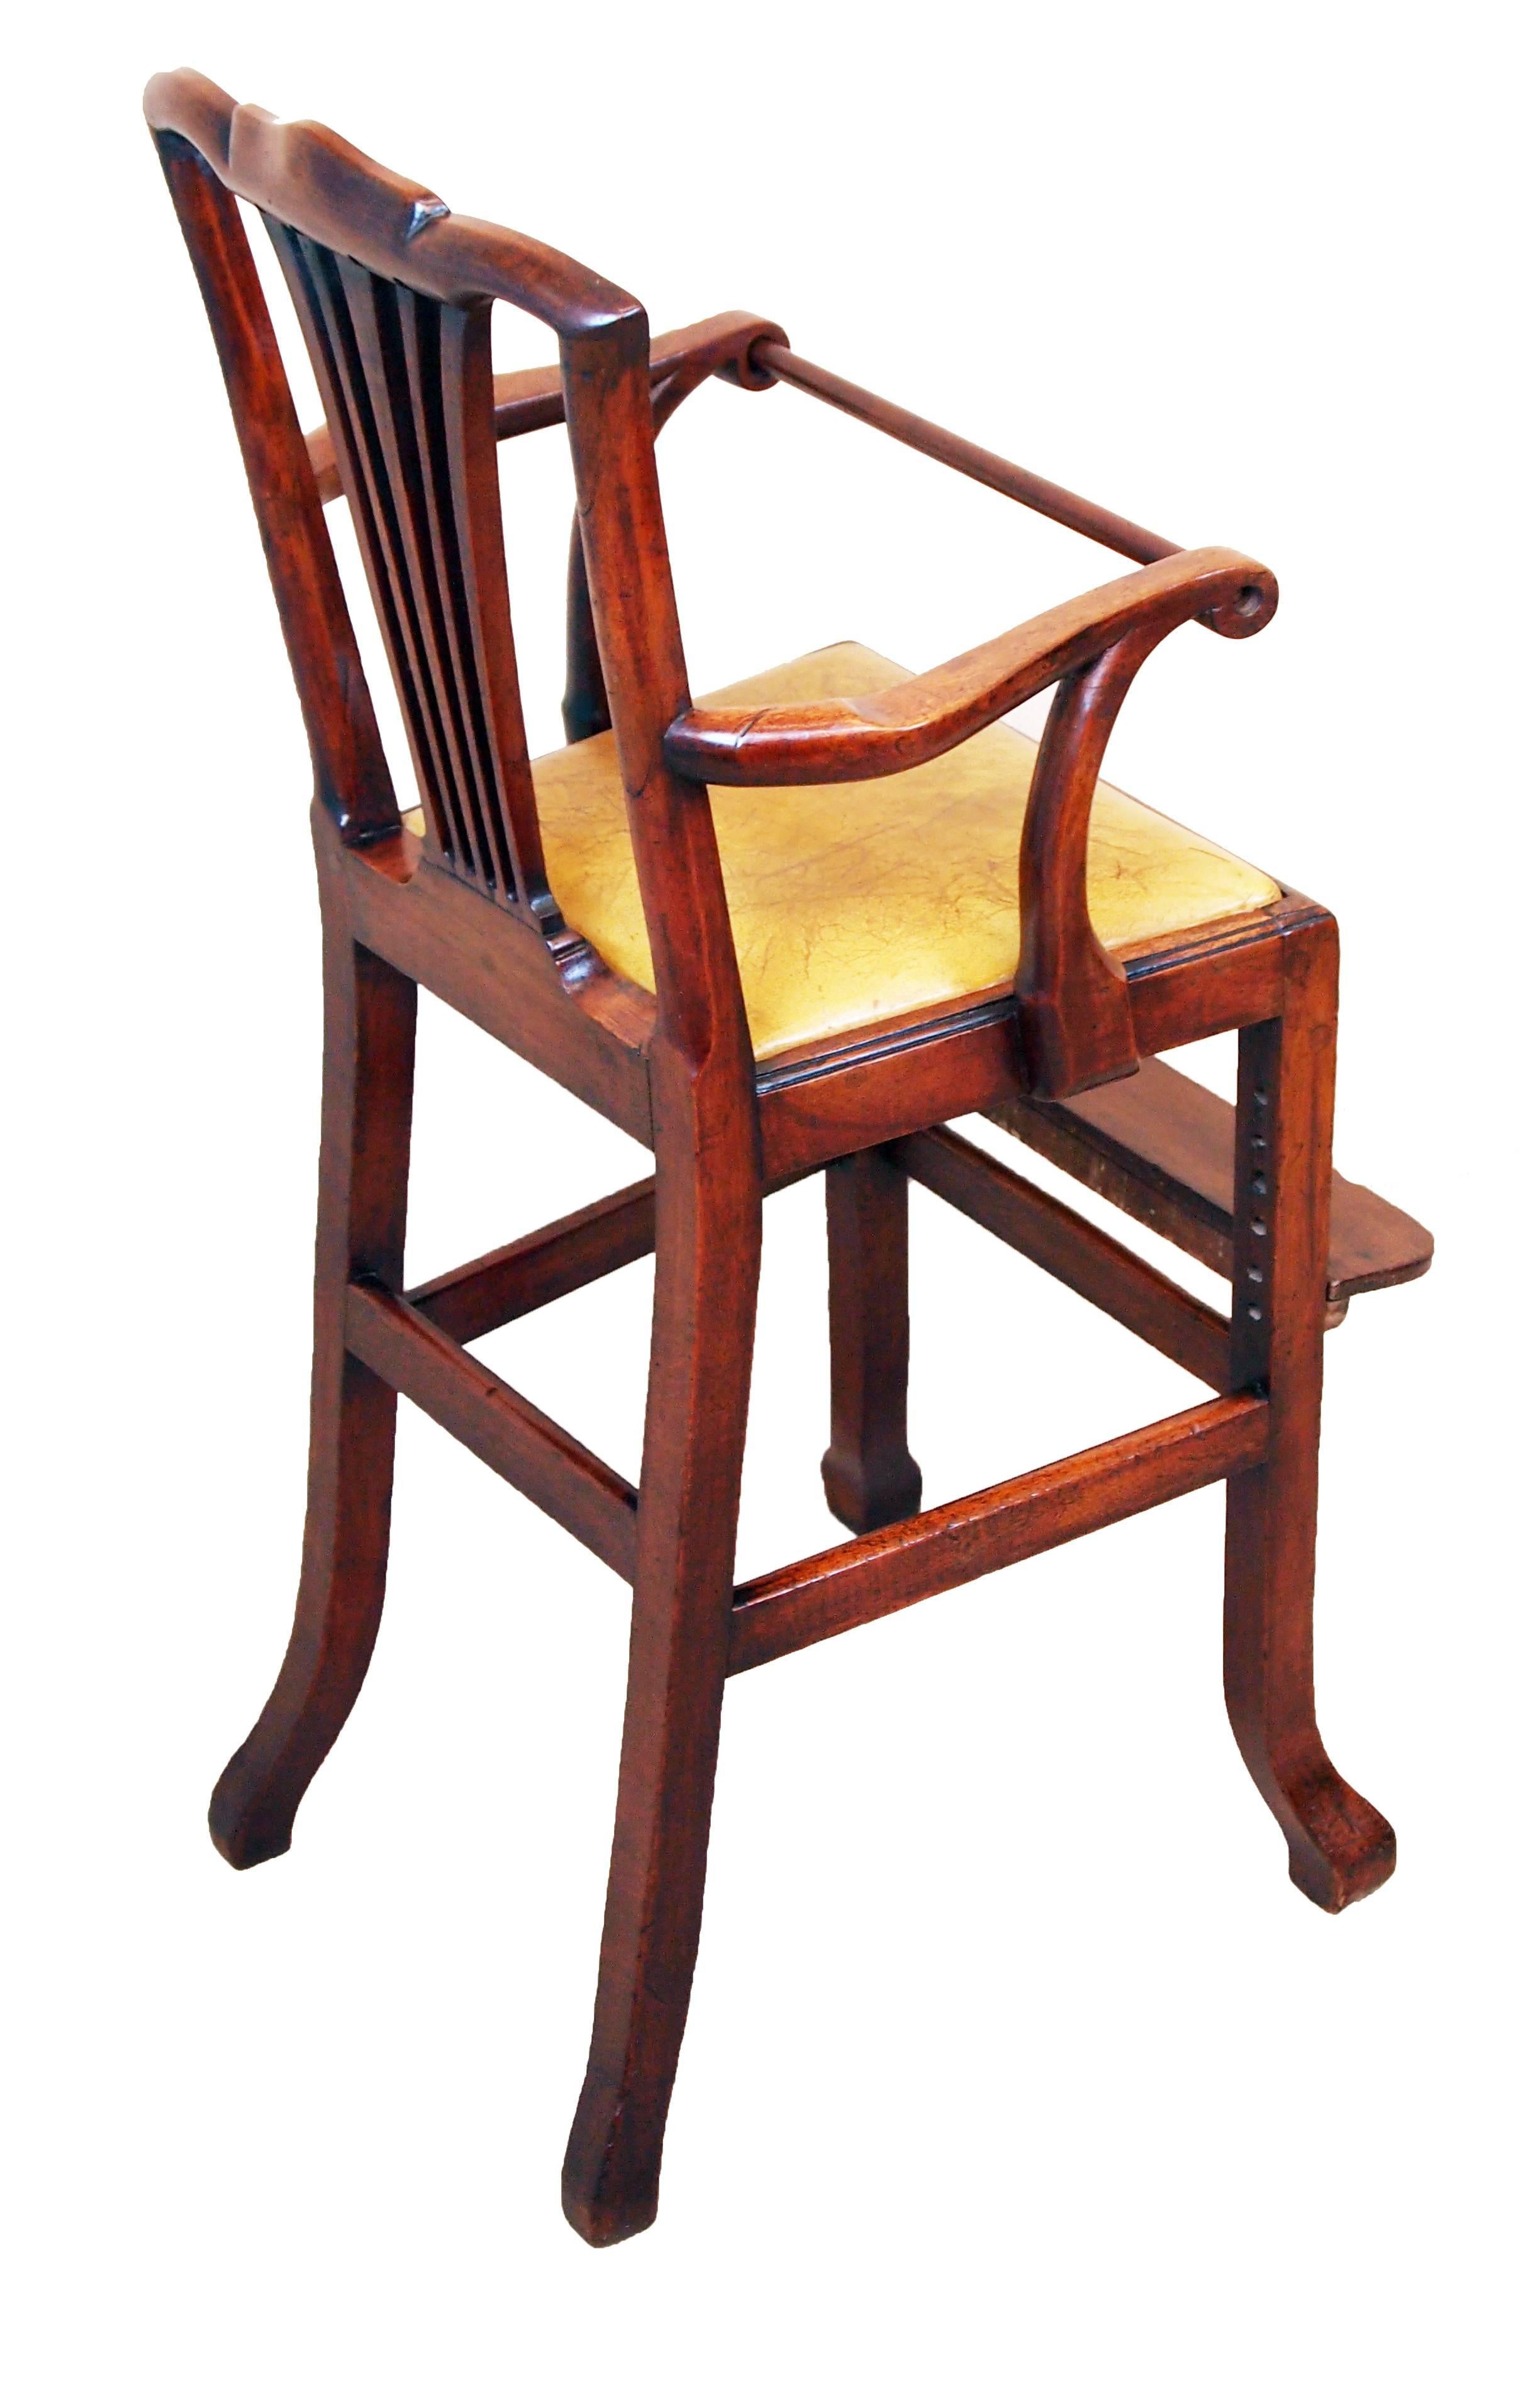 A stunning 18th century Chippendale period mahogany childs high chair
Having pierced fan splat back above drop in seat with turned safety
Bar raised on elegant square chamfered legs terminating with
Unusual kicked feet.

(This is an extremely